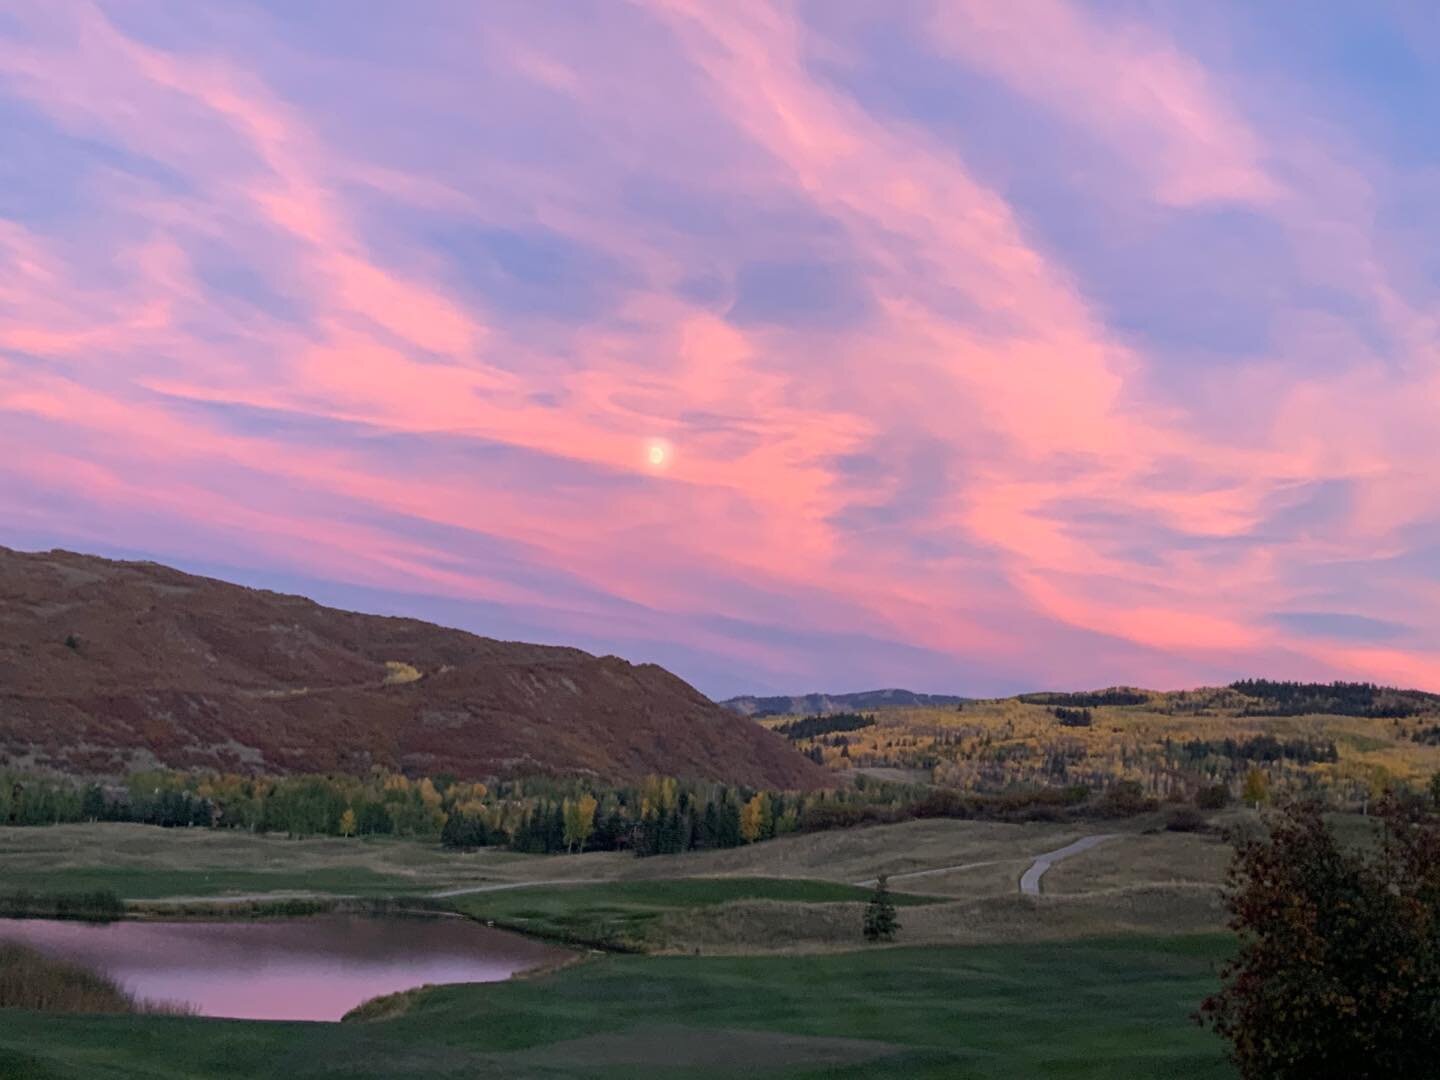 Sunset last night with the moon rising. Beautiful fall colors in #Snowmass Village!